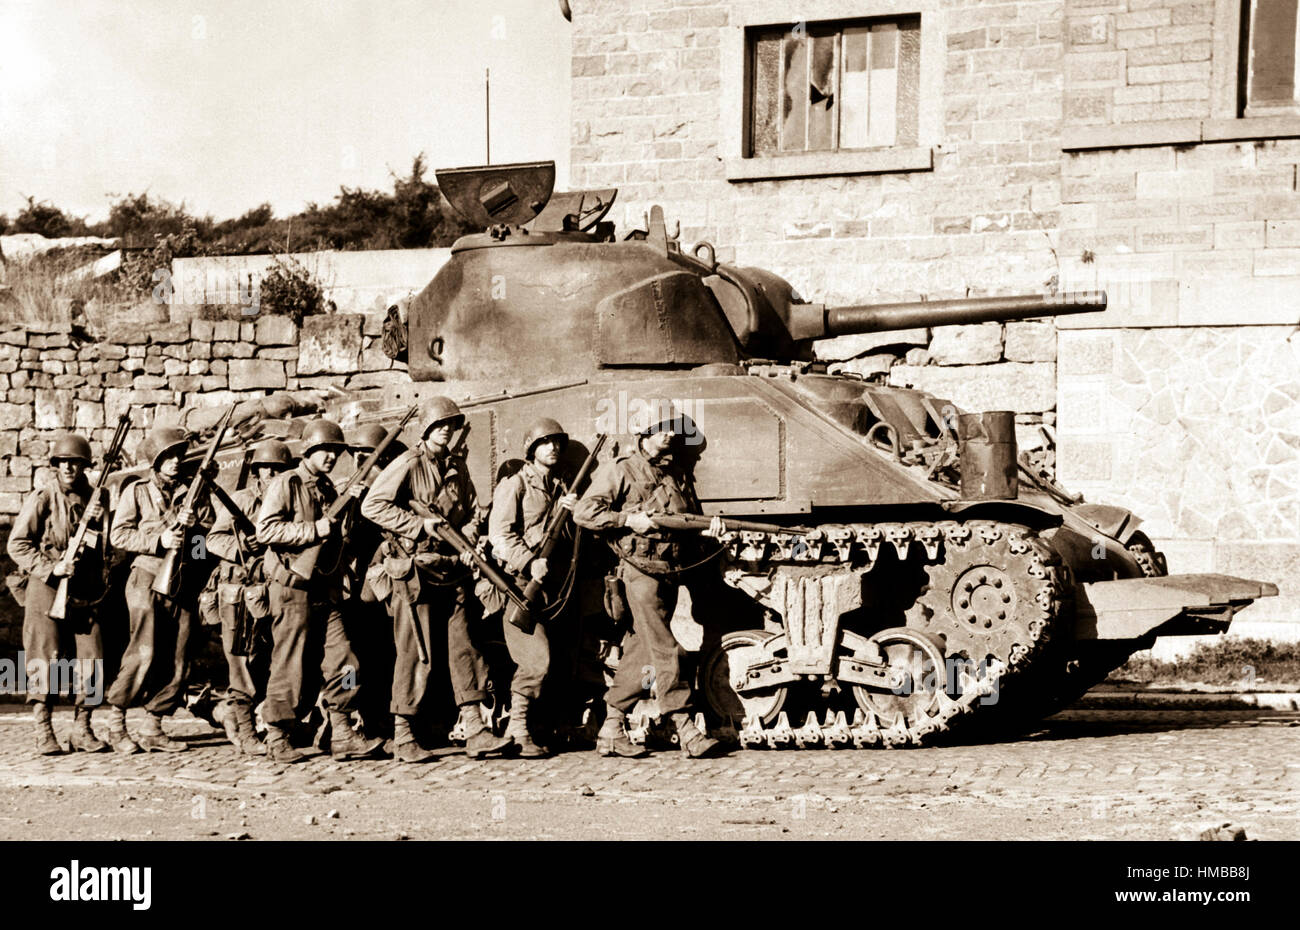 Yanks of 60th Inf. Regt. advance into a Belgian town under the protection of a heavy tank.  September 9, 1944.  Spangle.  (Army) NARA FILE #:  111-SC-193903 WAR & CONFLICT BOOK #:  1062 Stock Photo